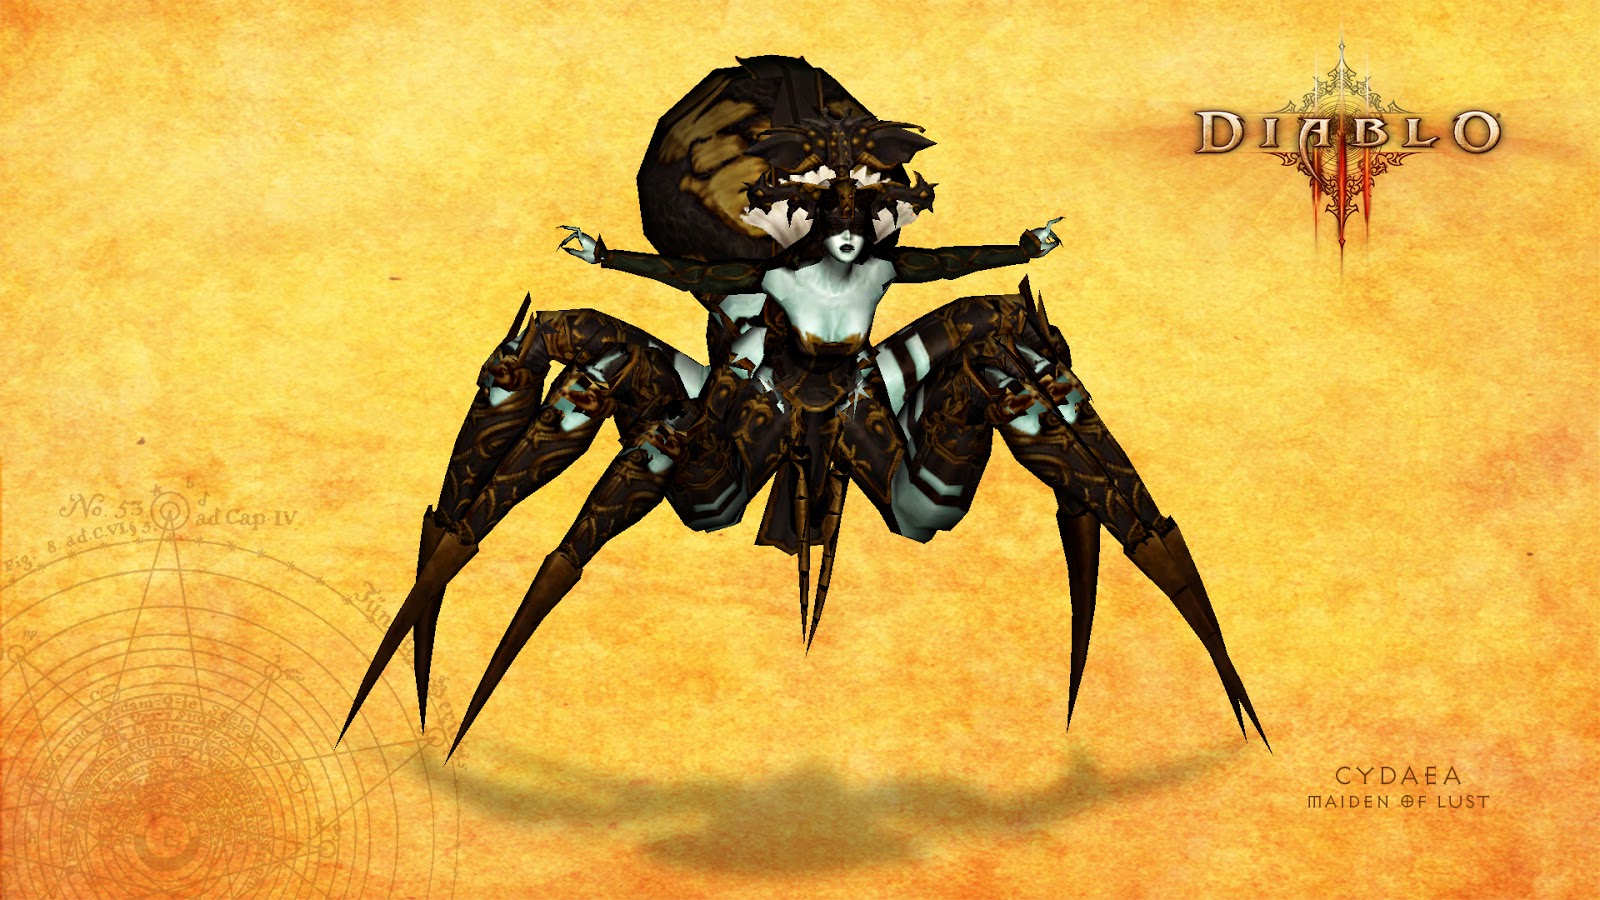 Cydaea is a monster from the video game "Diablo III". 